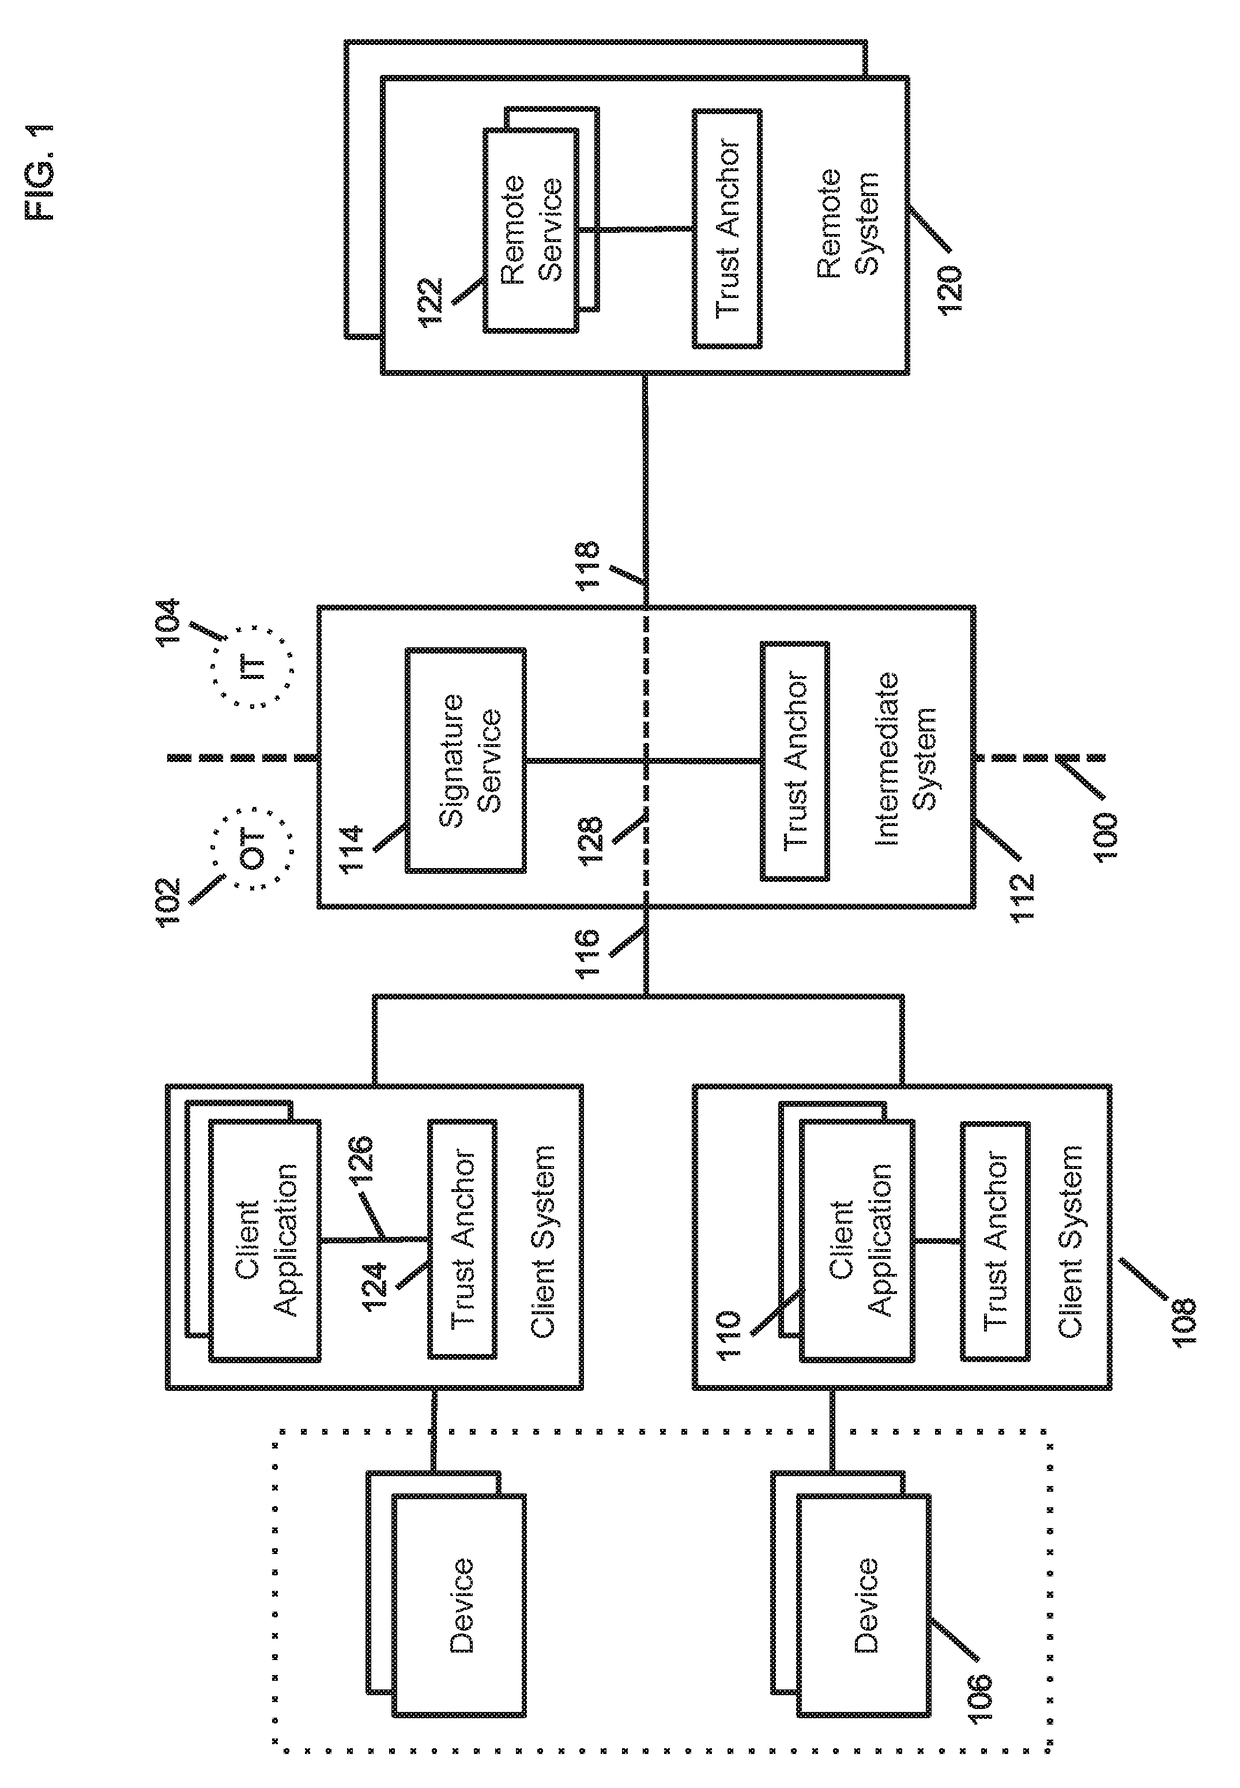 System and method for a multi system trust chain